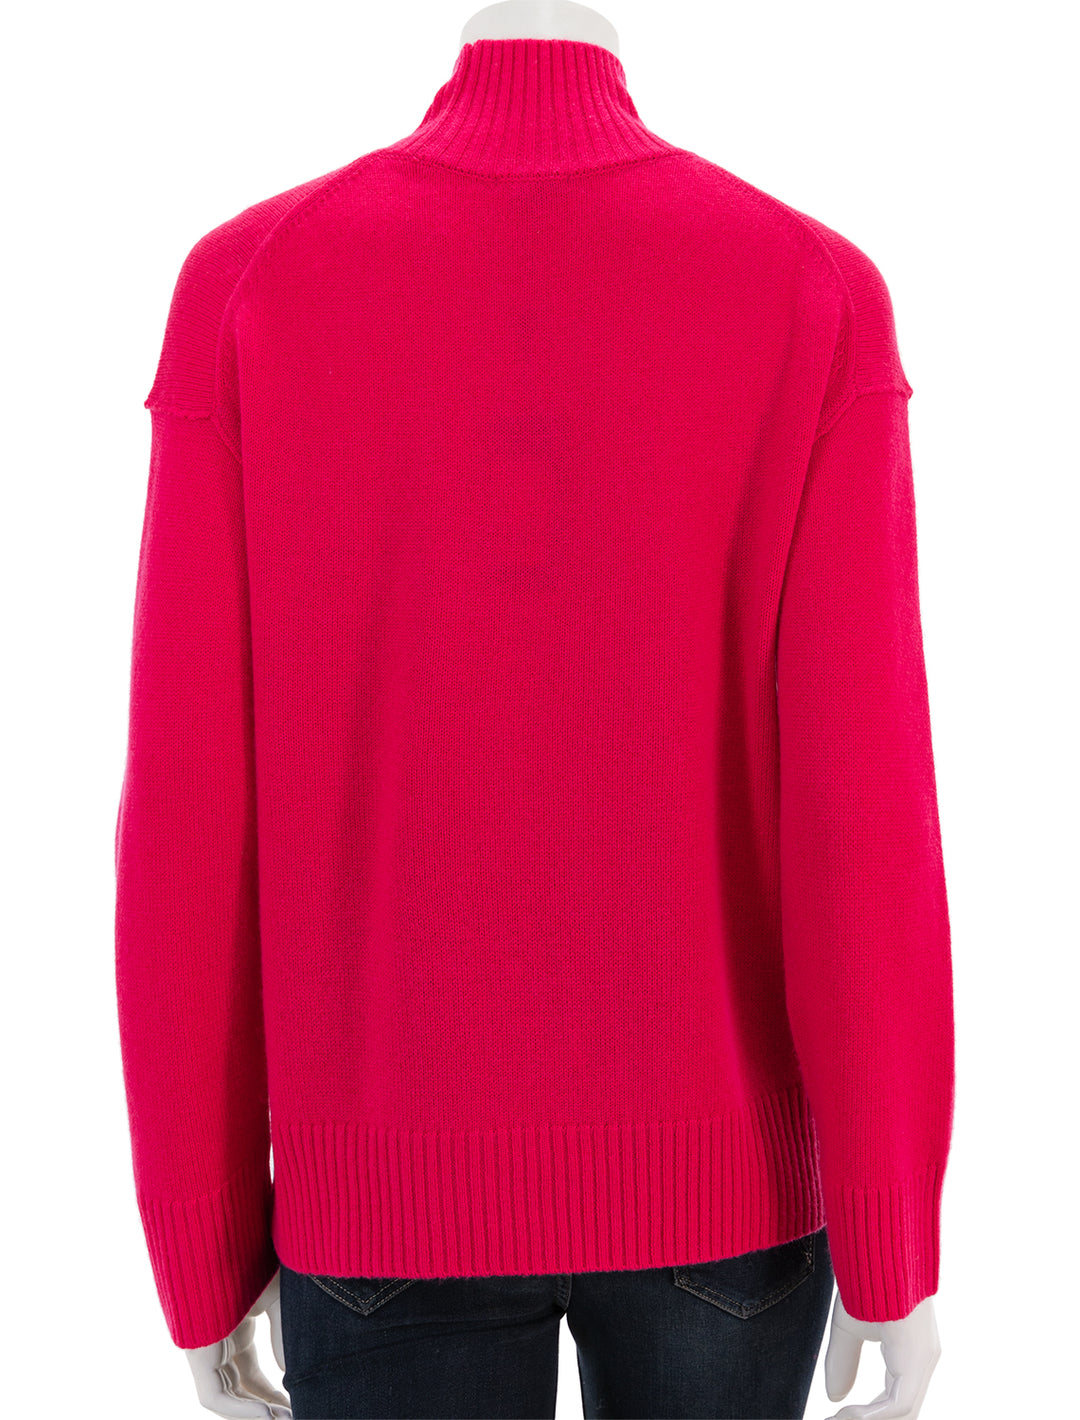 Back view of Rails' sasha pullover in cerise.